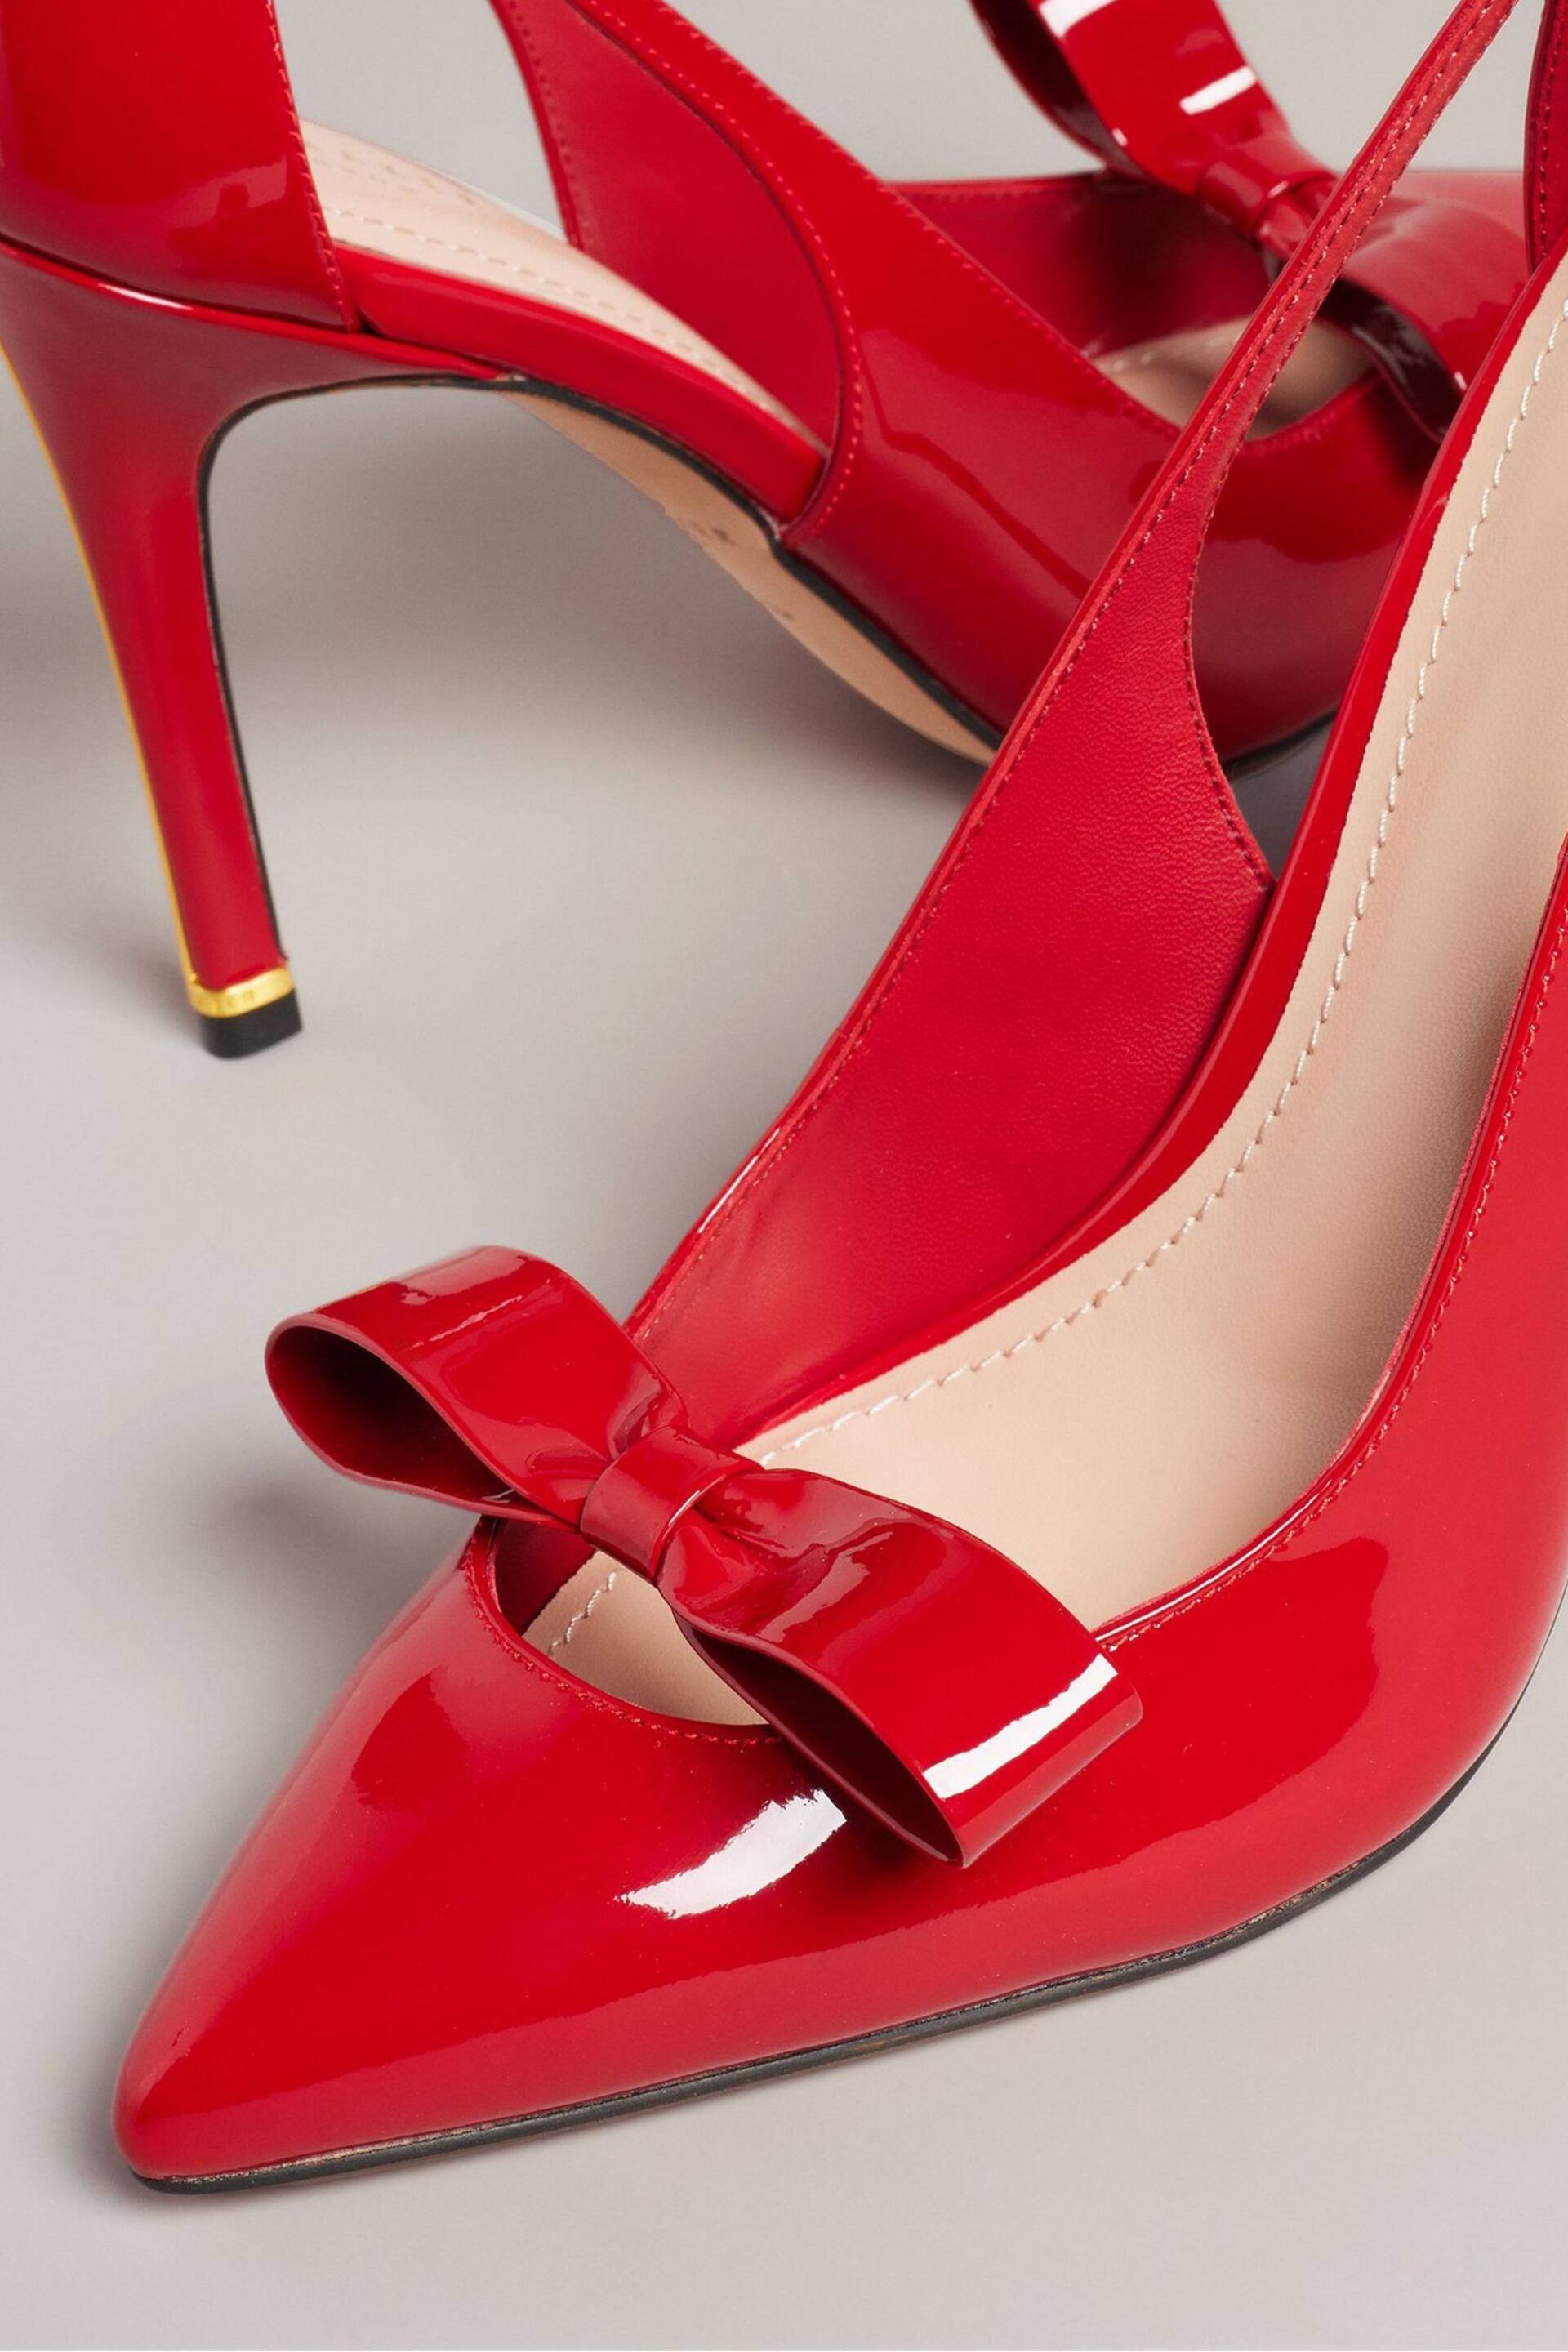 Ted Baker Red Orliney Patent Bow 100mm Cut-Out Detail Courts - Image 4 of 5